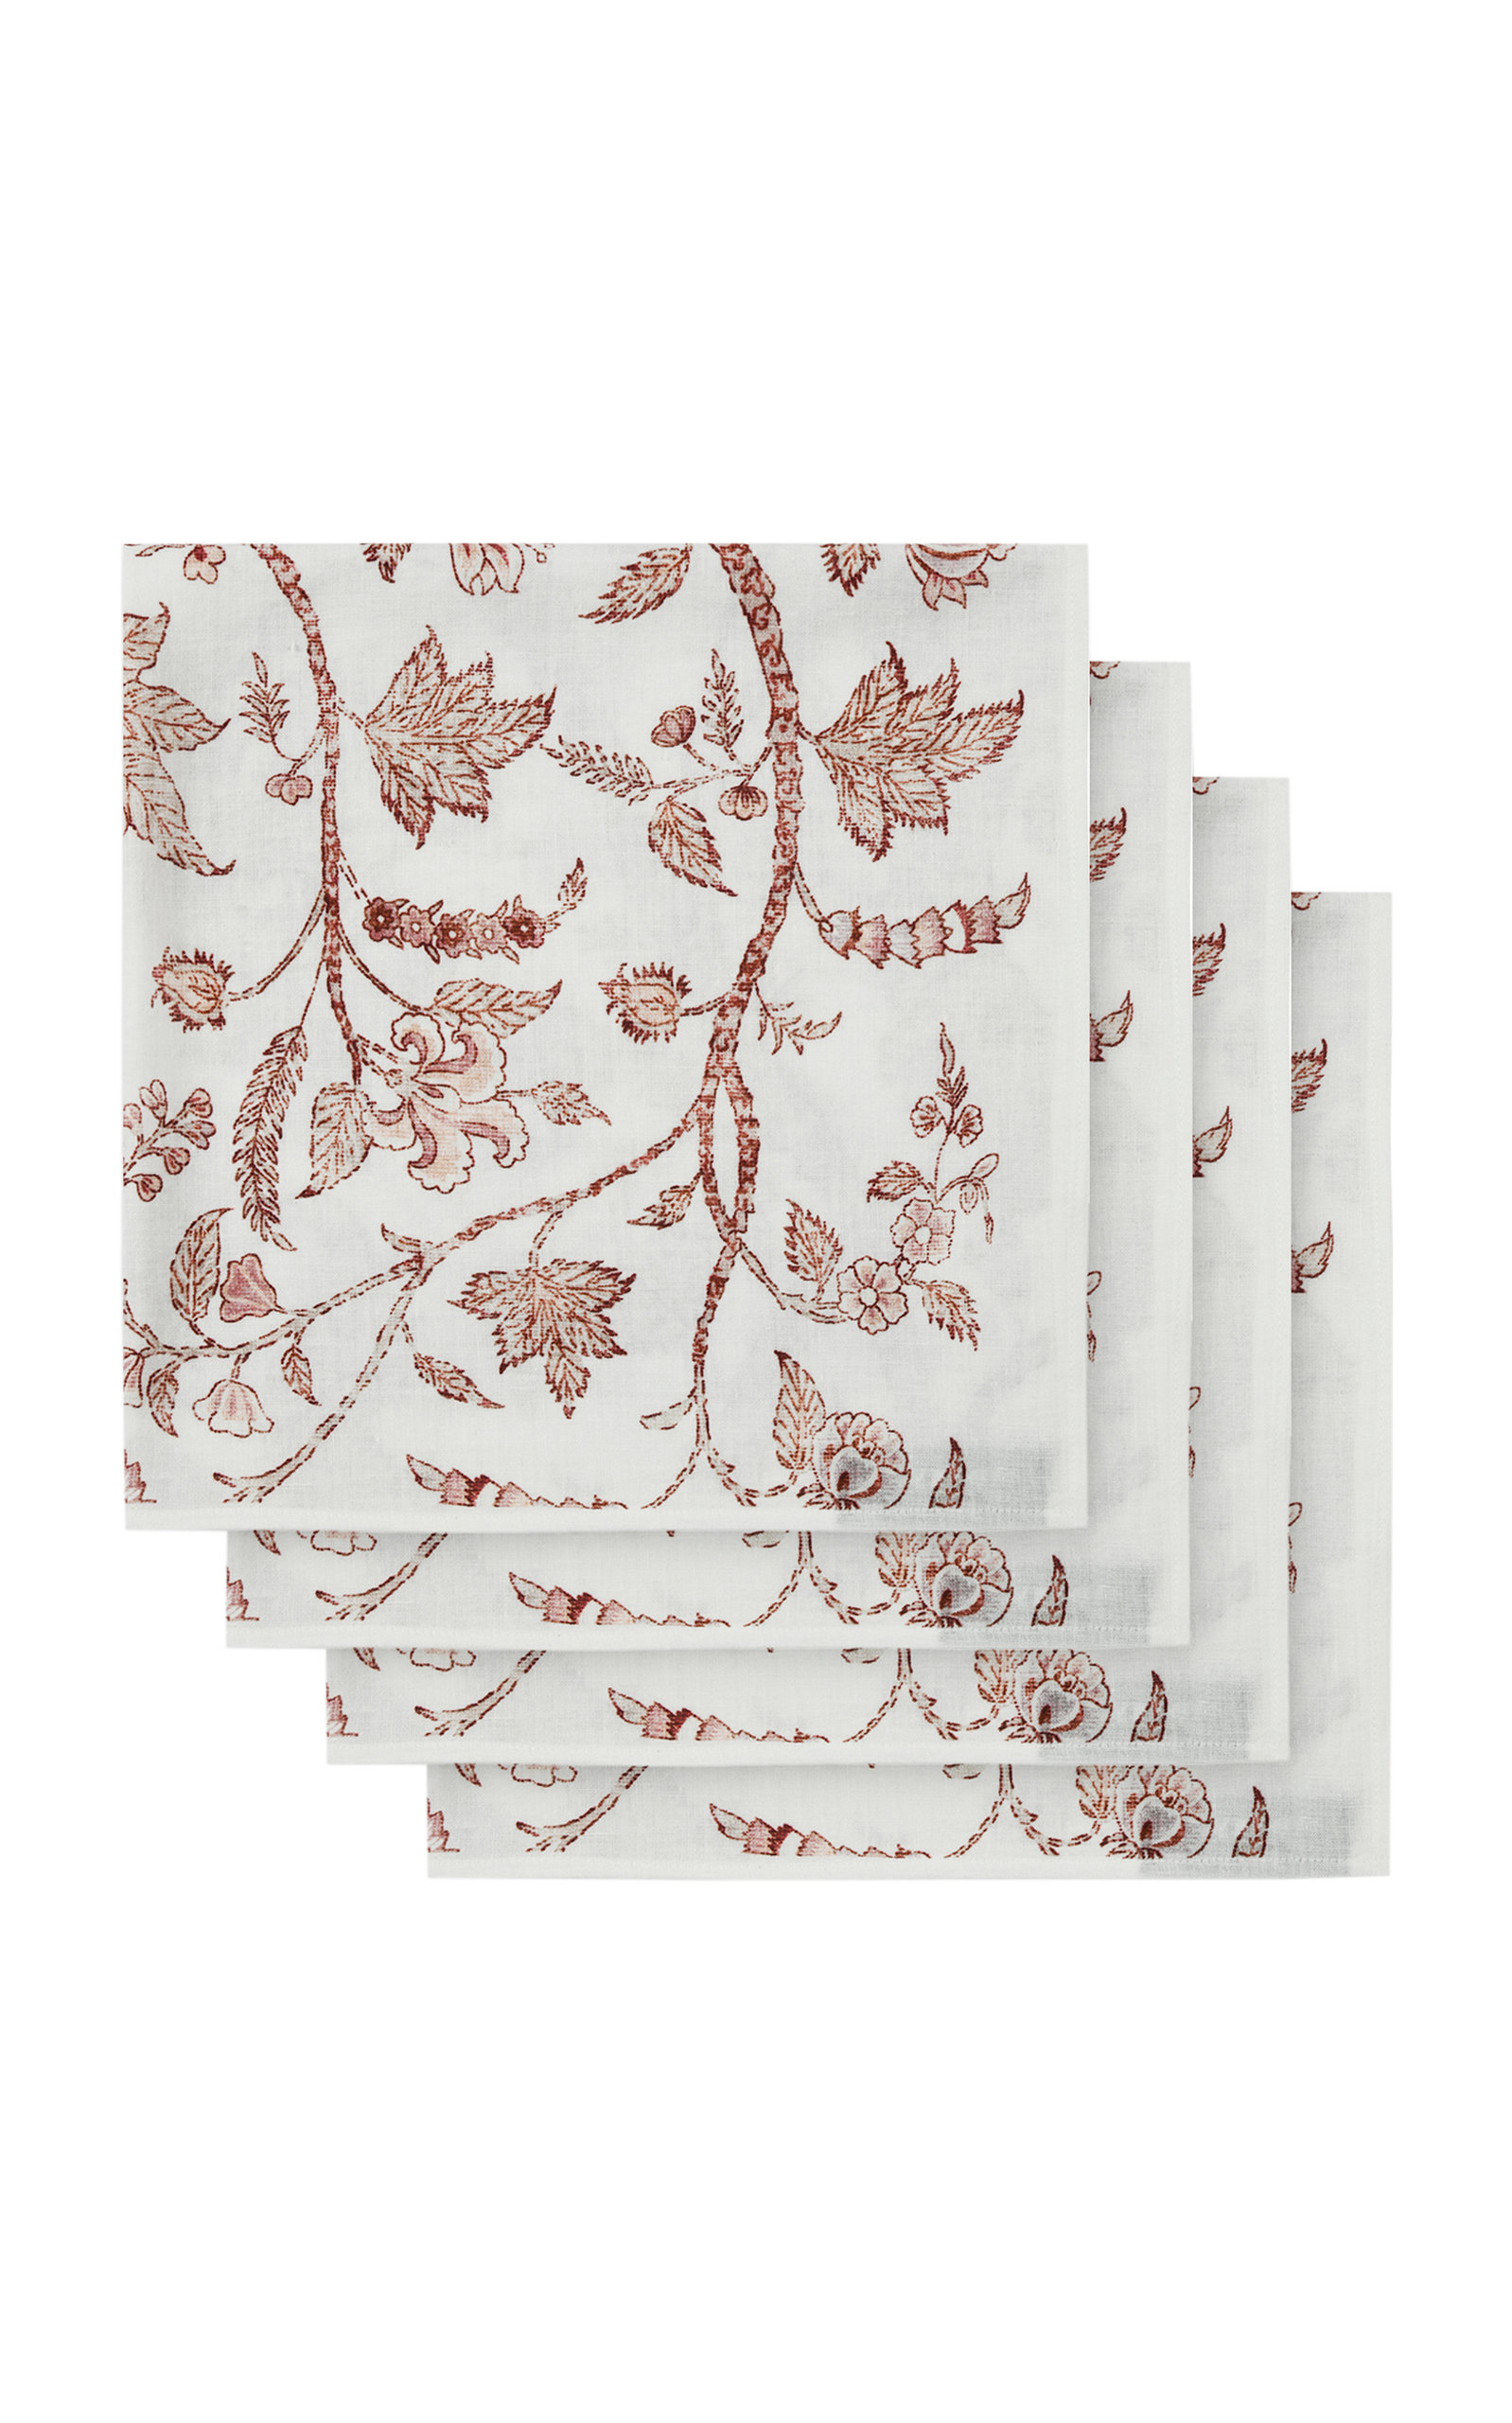 D'ascoli Set-of-four Tuckahoe Cotton Napkins In Red